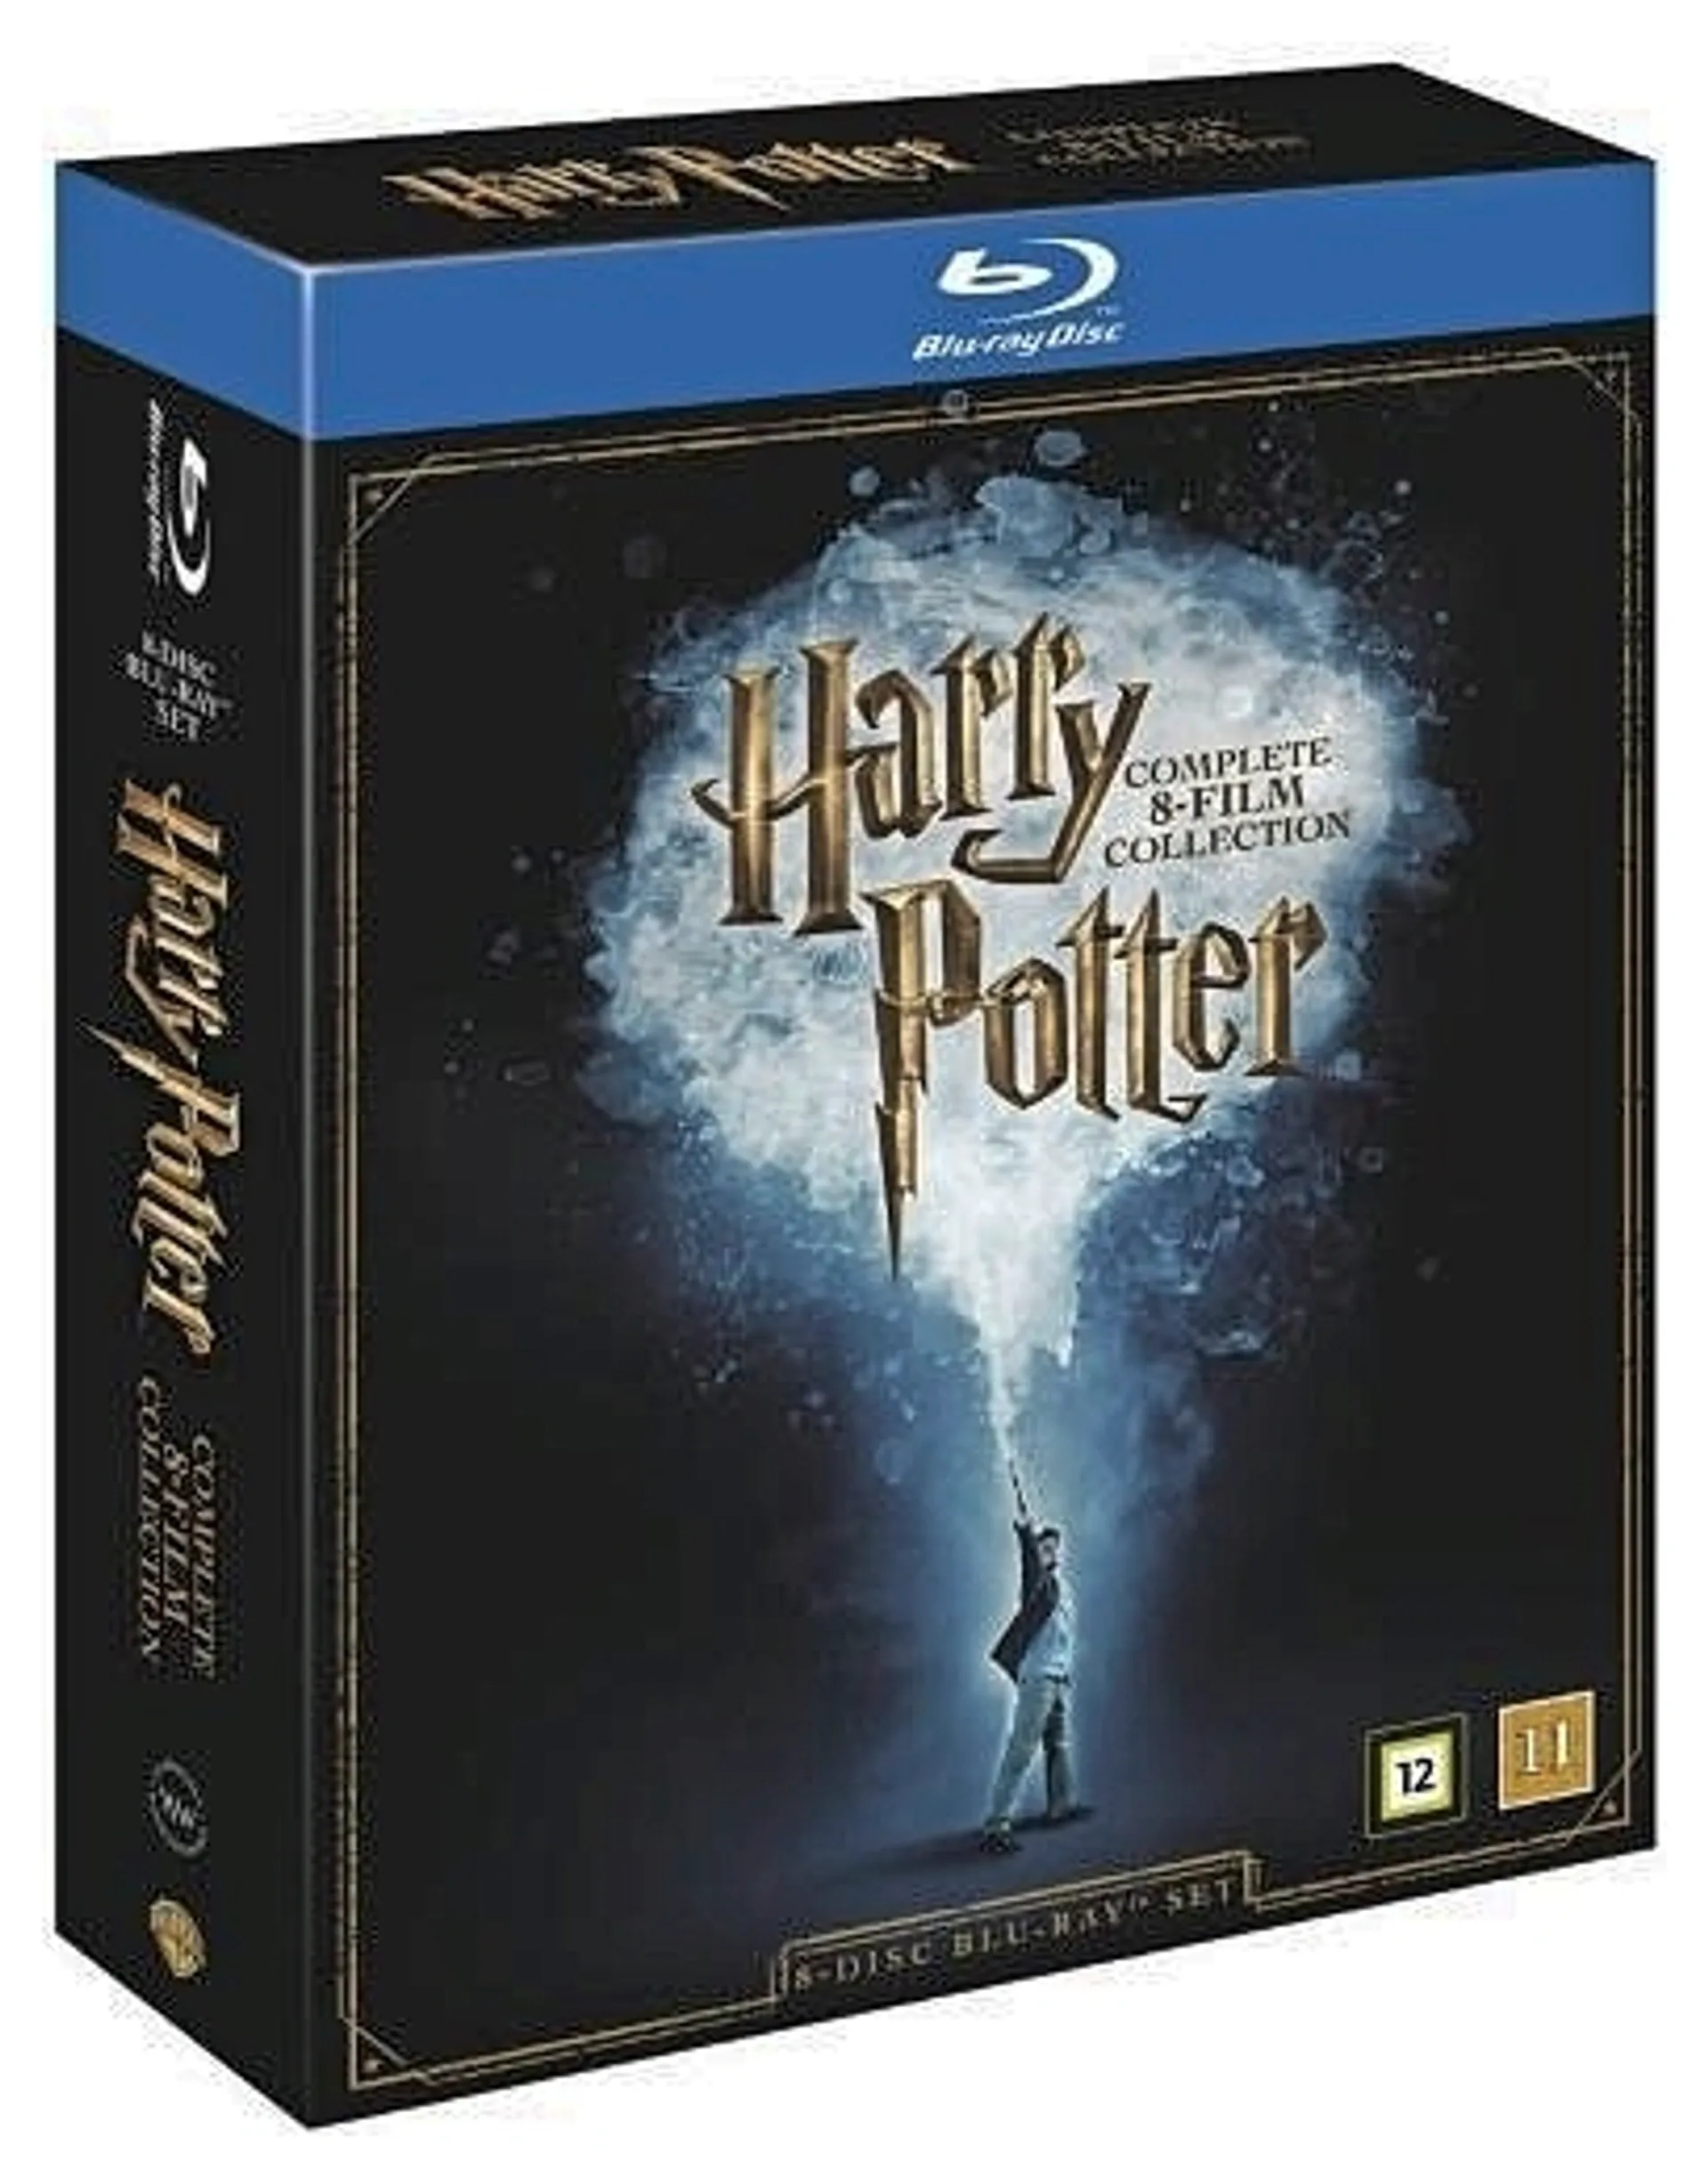 Harry Potter - Complete Box 8Blu-ray